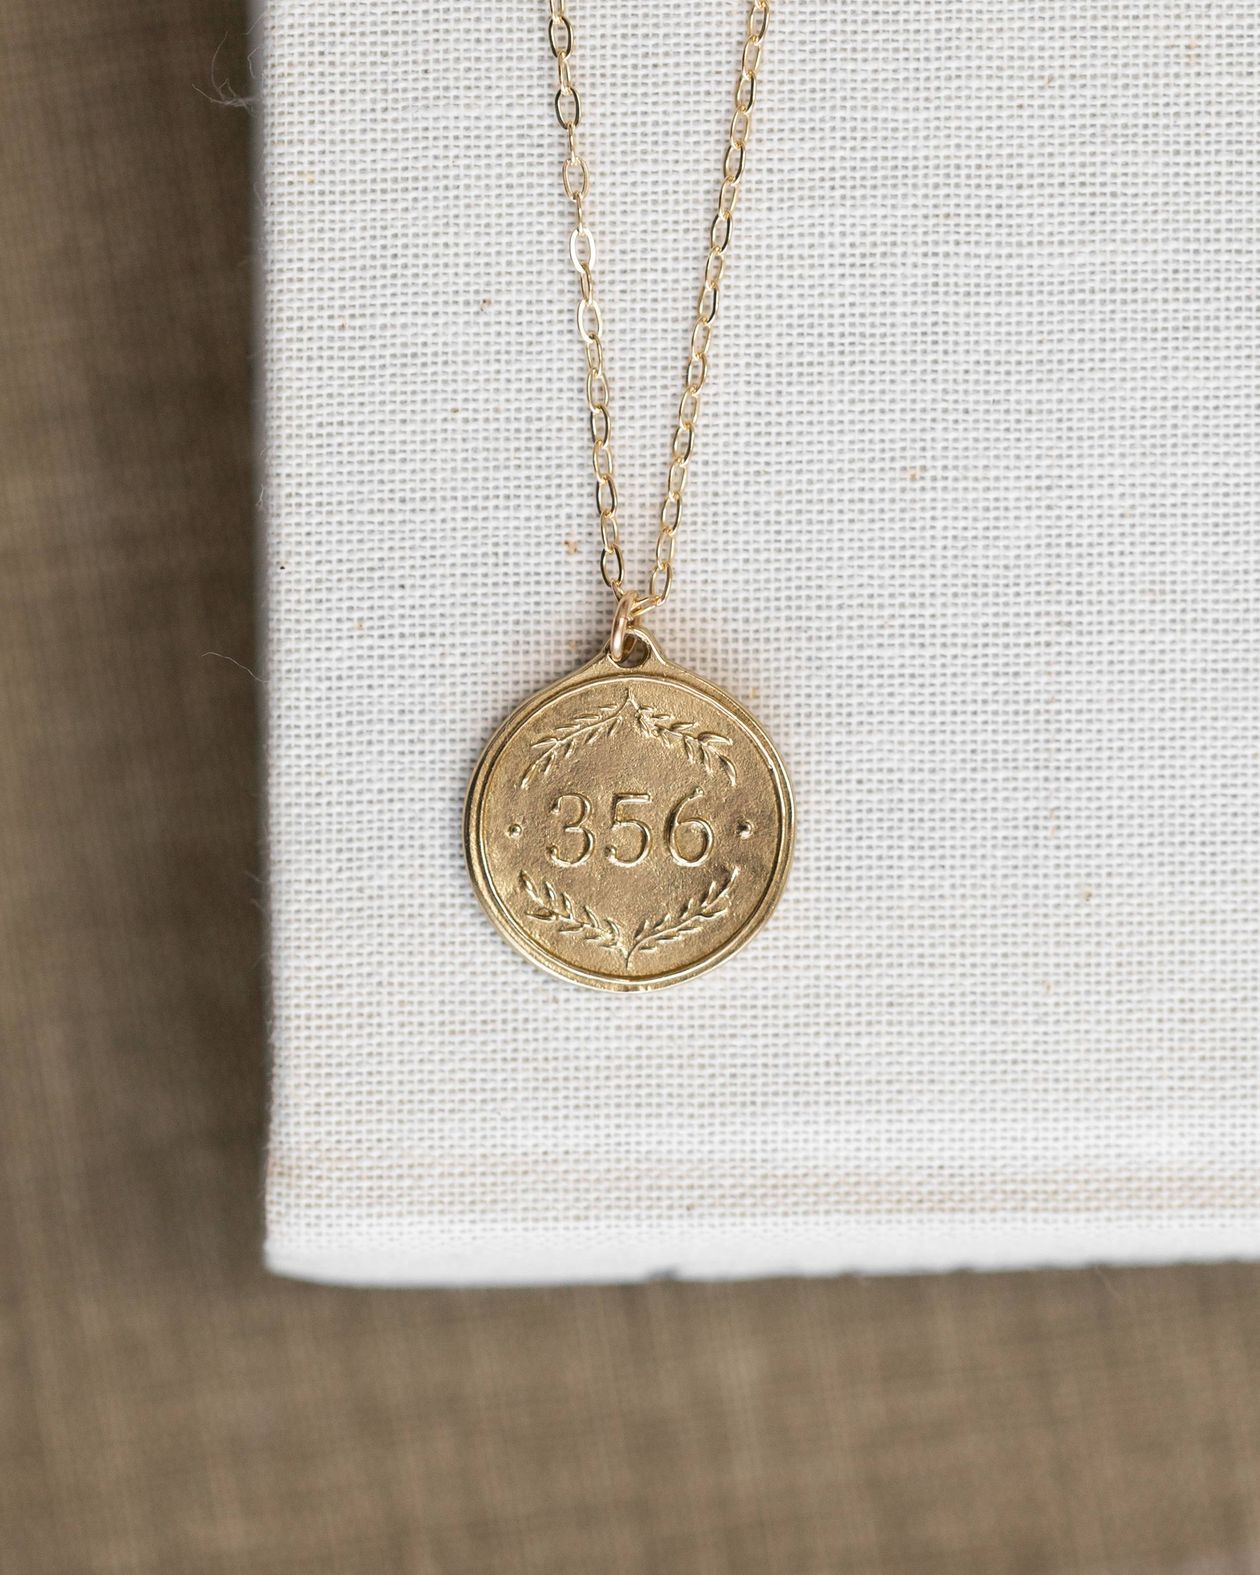 Madison Sterling Pendant Verse Necklace - Proverbs 3:5-6, 16 Inch-322 Fast Fashion Jewelry Necklace-Little Bird Boutique